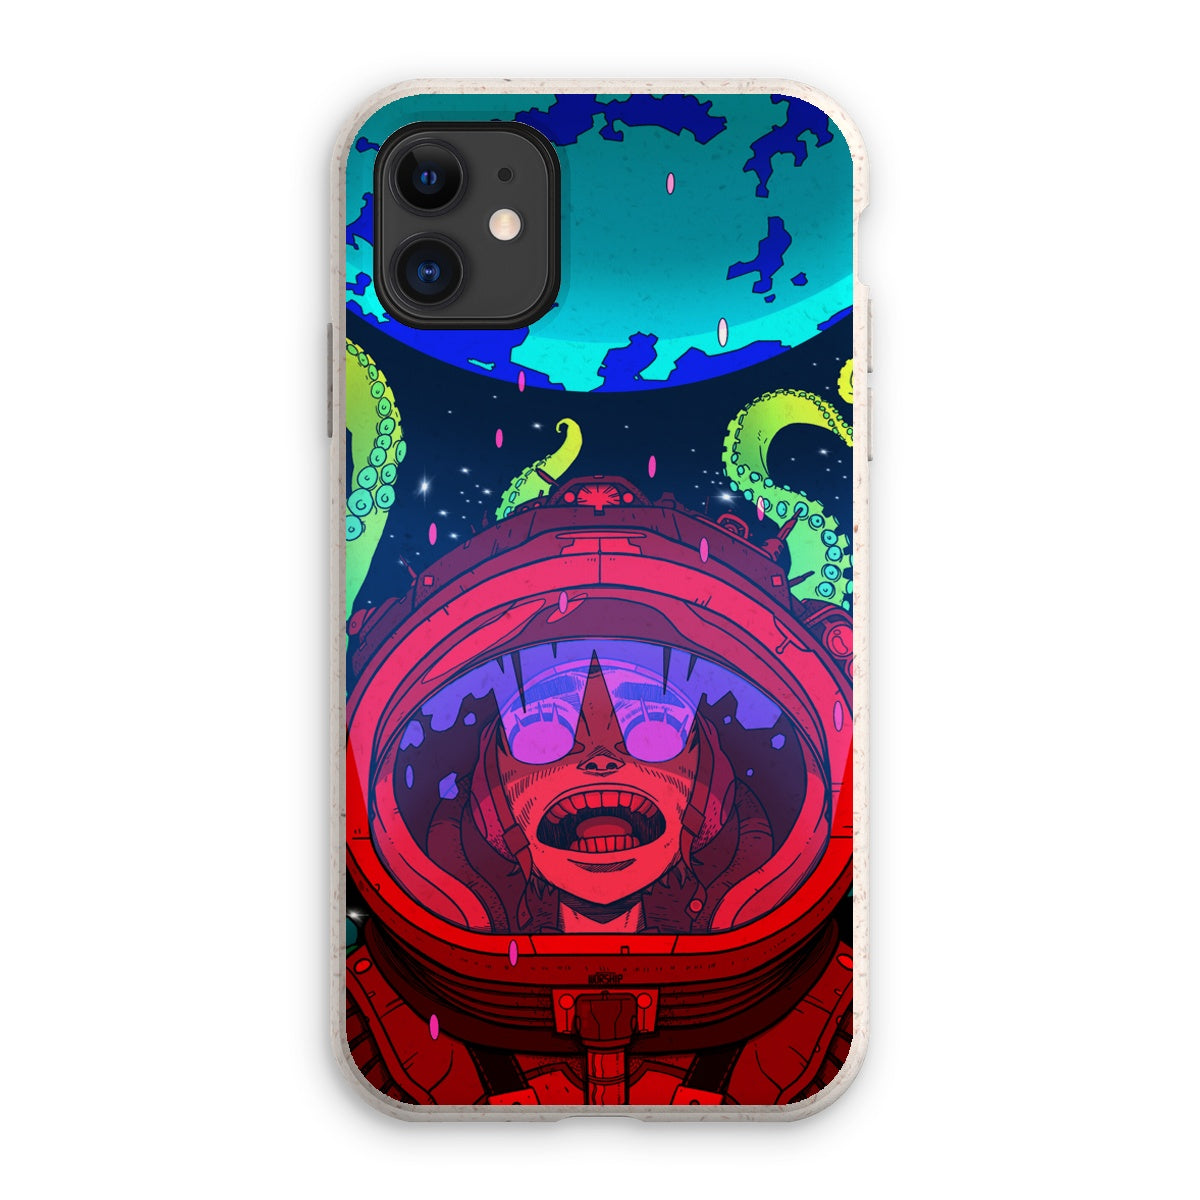 Unique and cool Gorillaz-style cthulhu phone case illustration